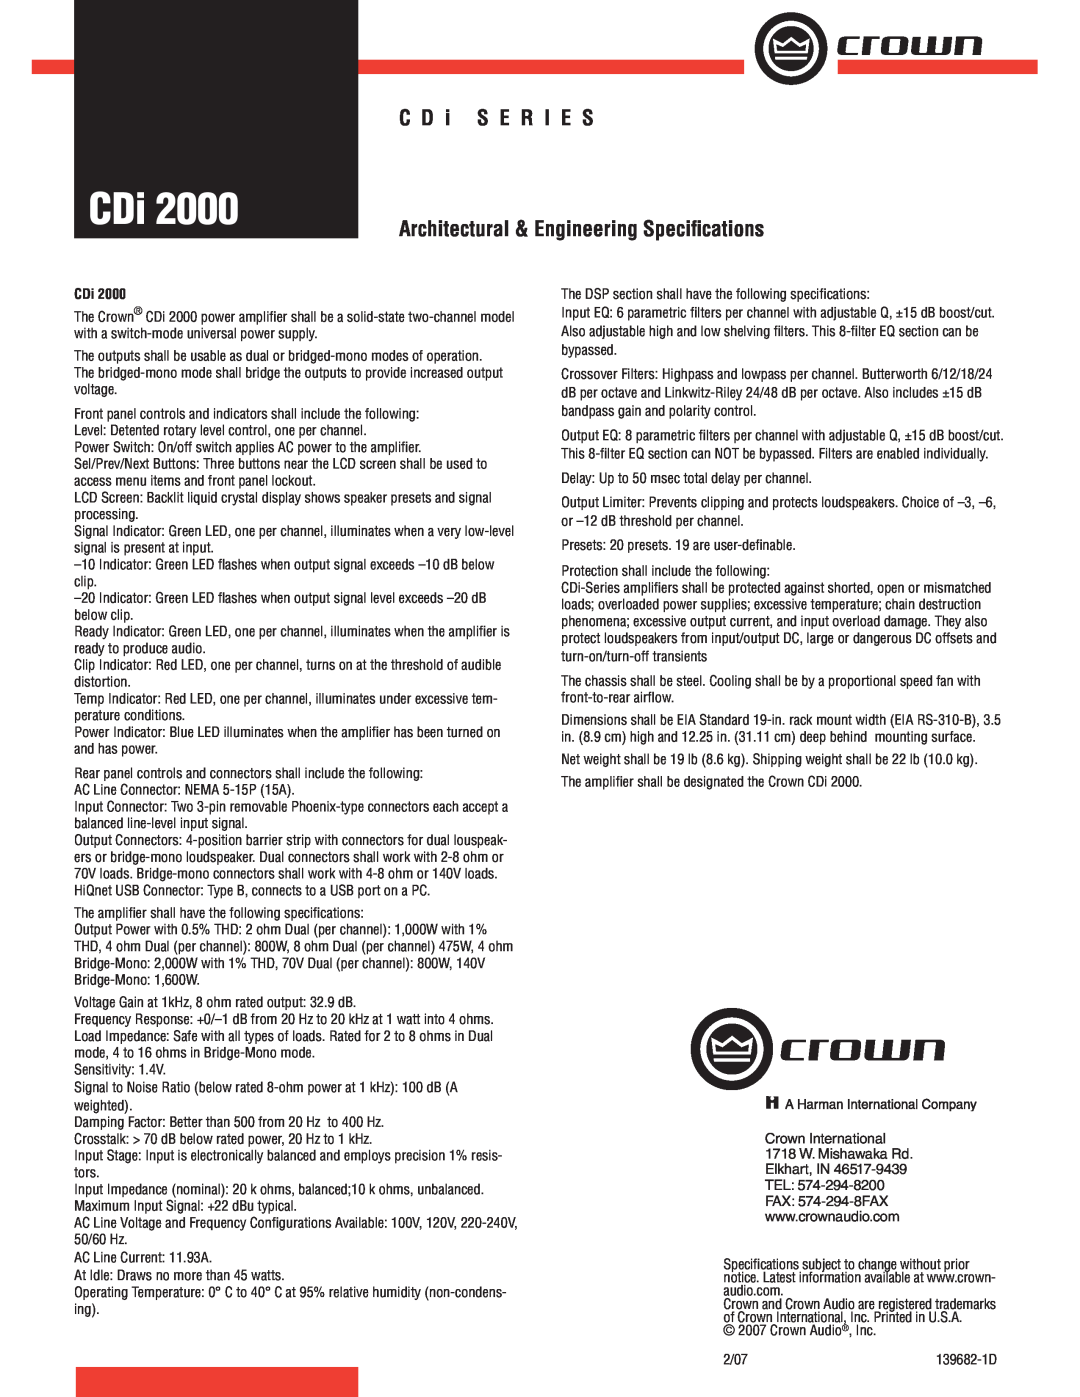 Crown Audio CDi 2000 specifications C D i S E R I E S, Architectural & Engineering Speciﬁcations 